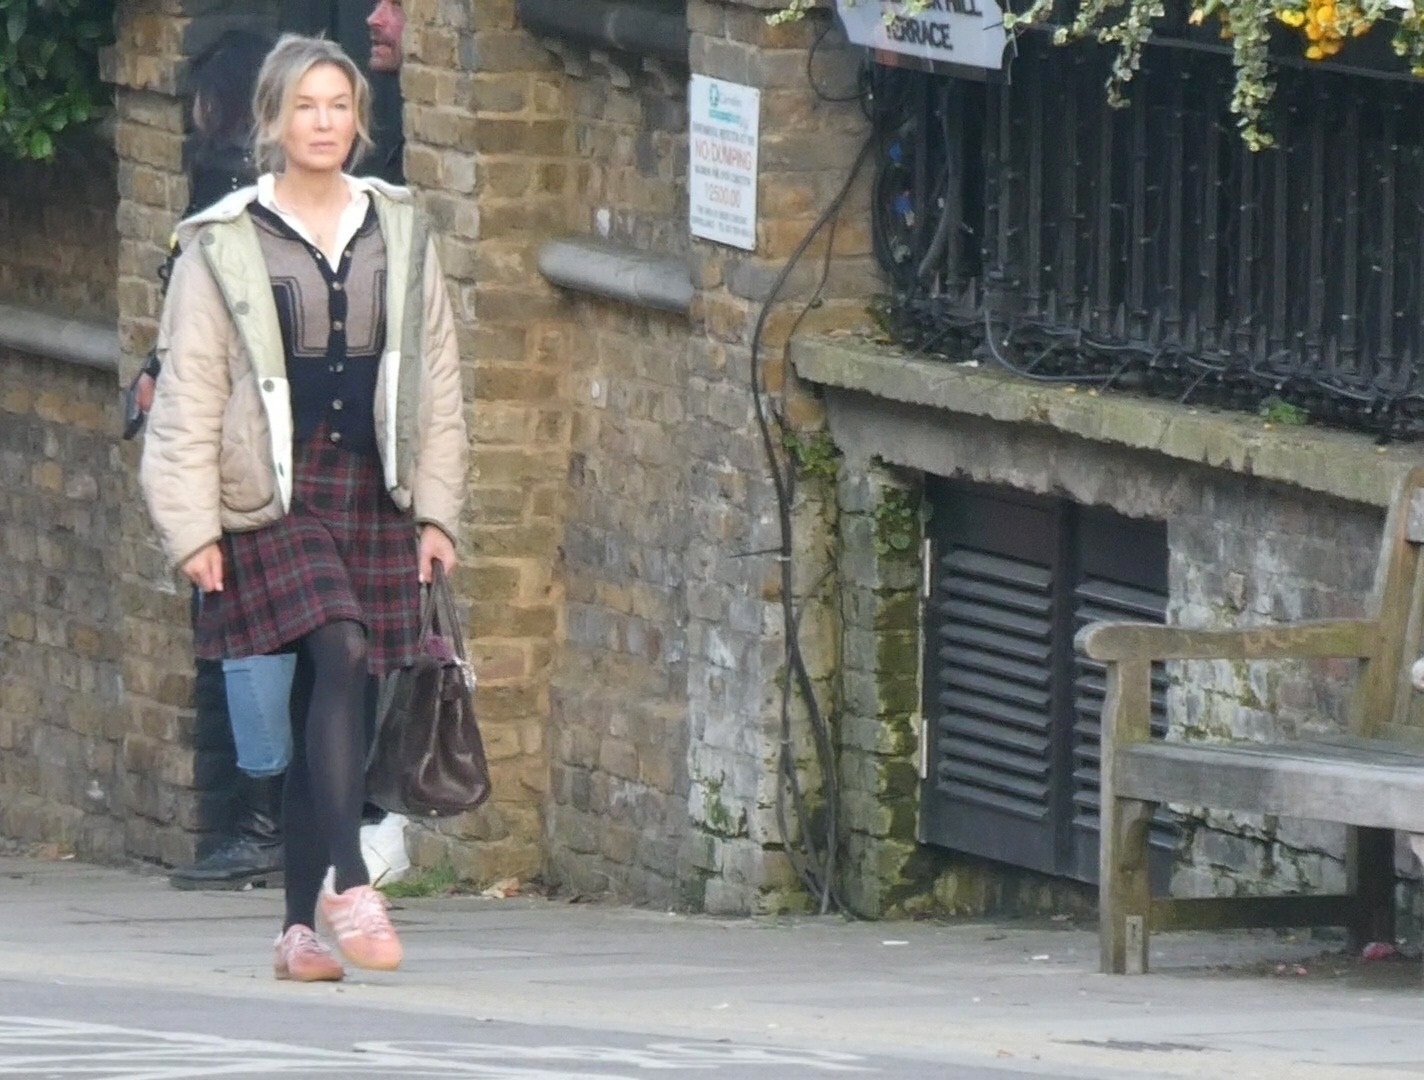 London, UNITED KINGDOM  -  Hollywood star Renee Zellweger and British actress Leila Farzad film at a bus stop in Camden on the set of 'Bridget Jones: Mad About the Boy'

BACKGRID UK 24 MAY 2024,Image: 876364195, License: Rights-managed, Restrictions: , Model Release: no, Pictured: Renee Zellweger, Leila Farzad, Credit line: BACKGRID / Backgrid UK / Profimedia